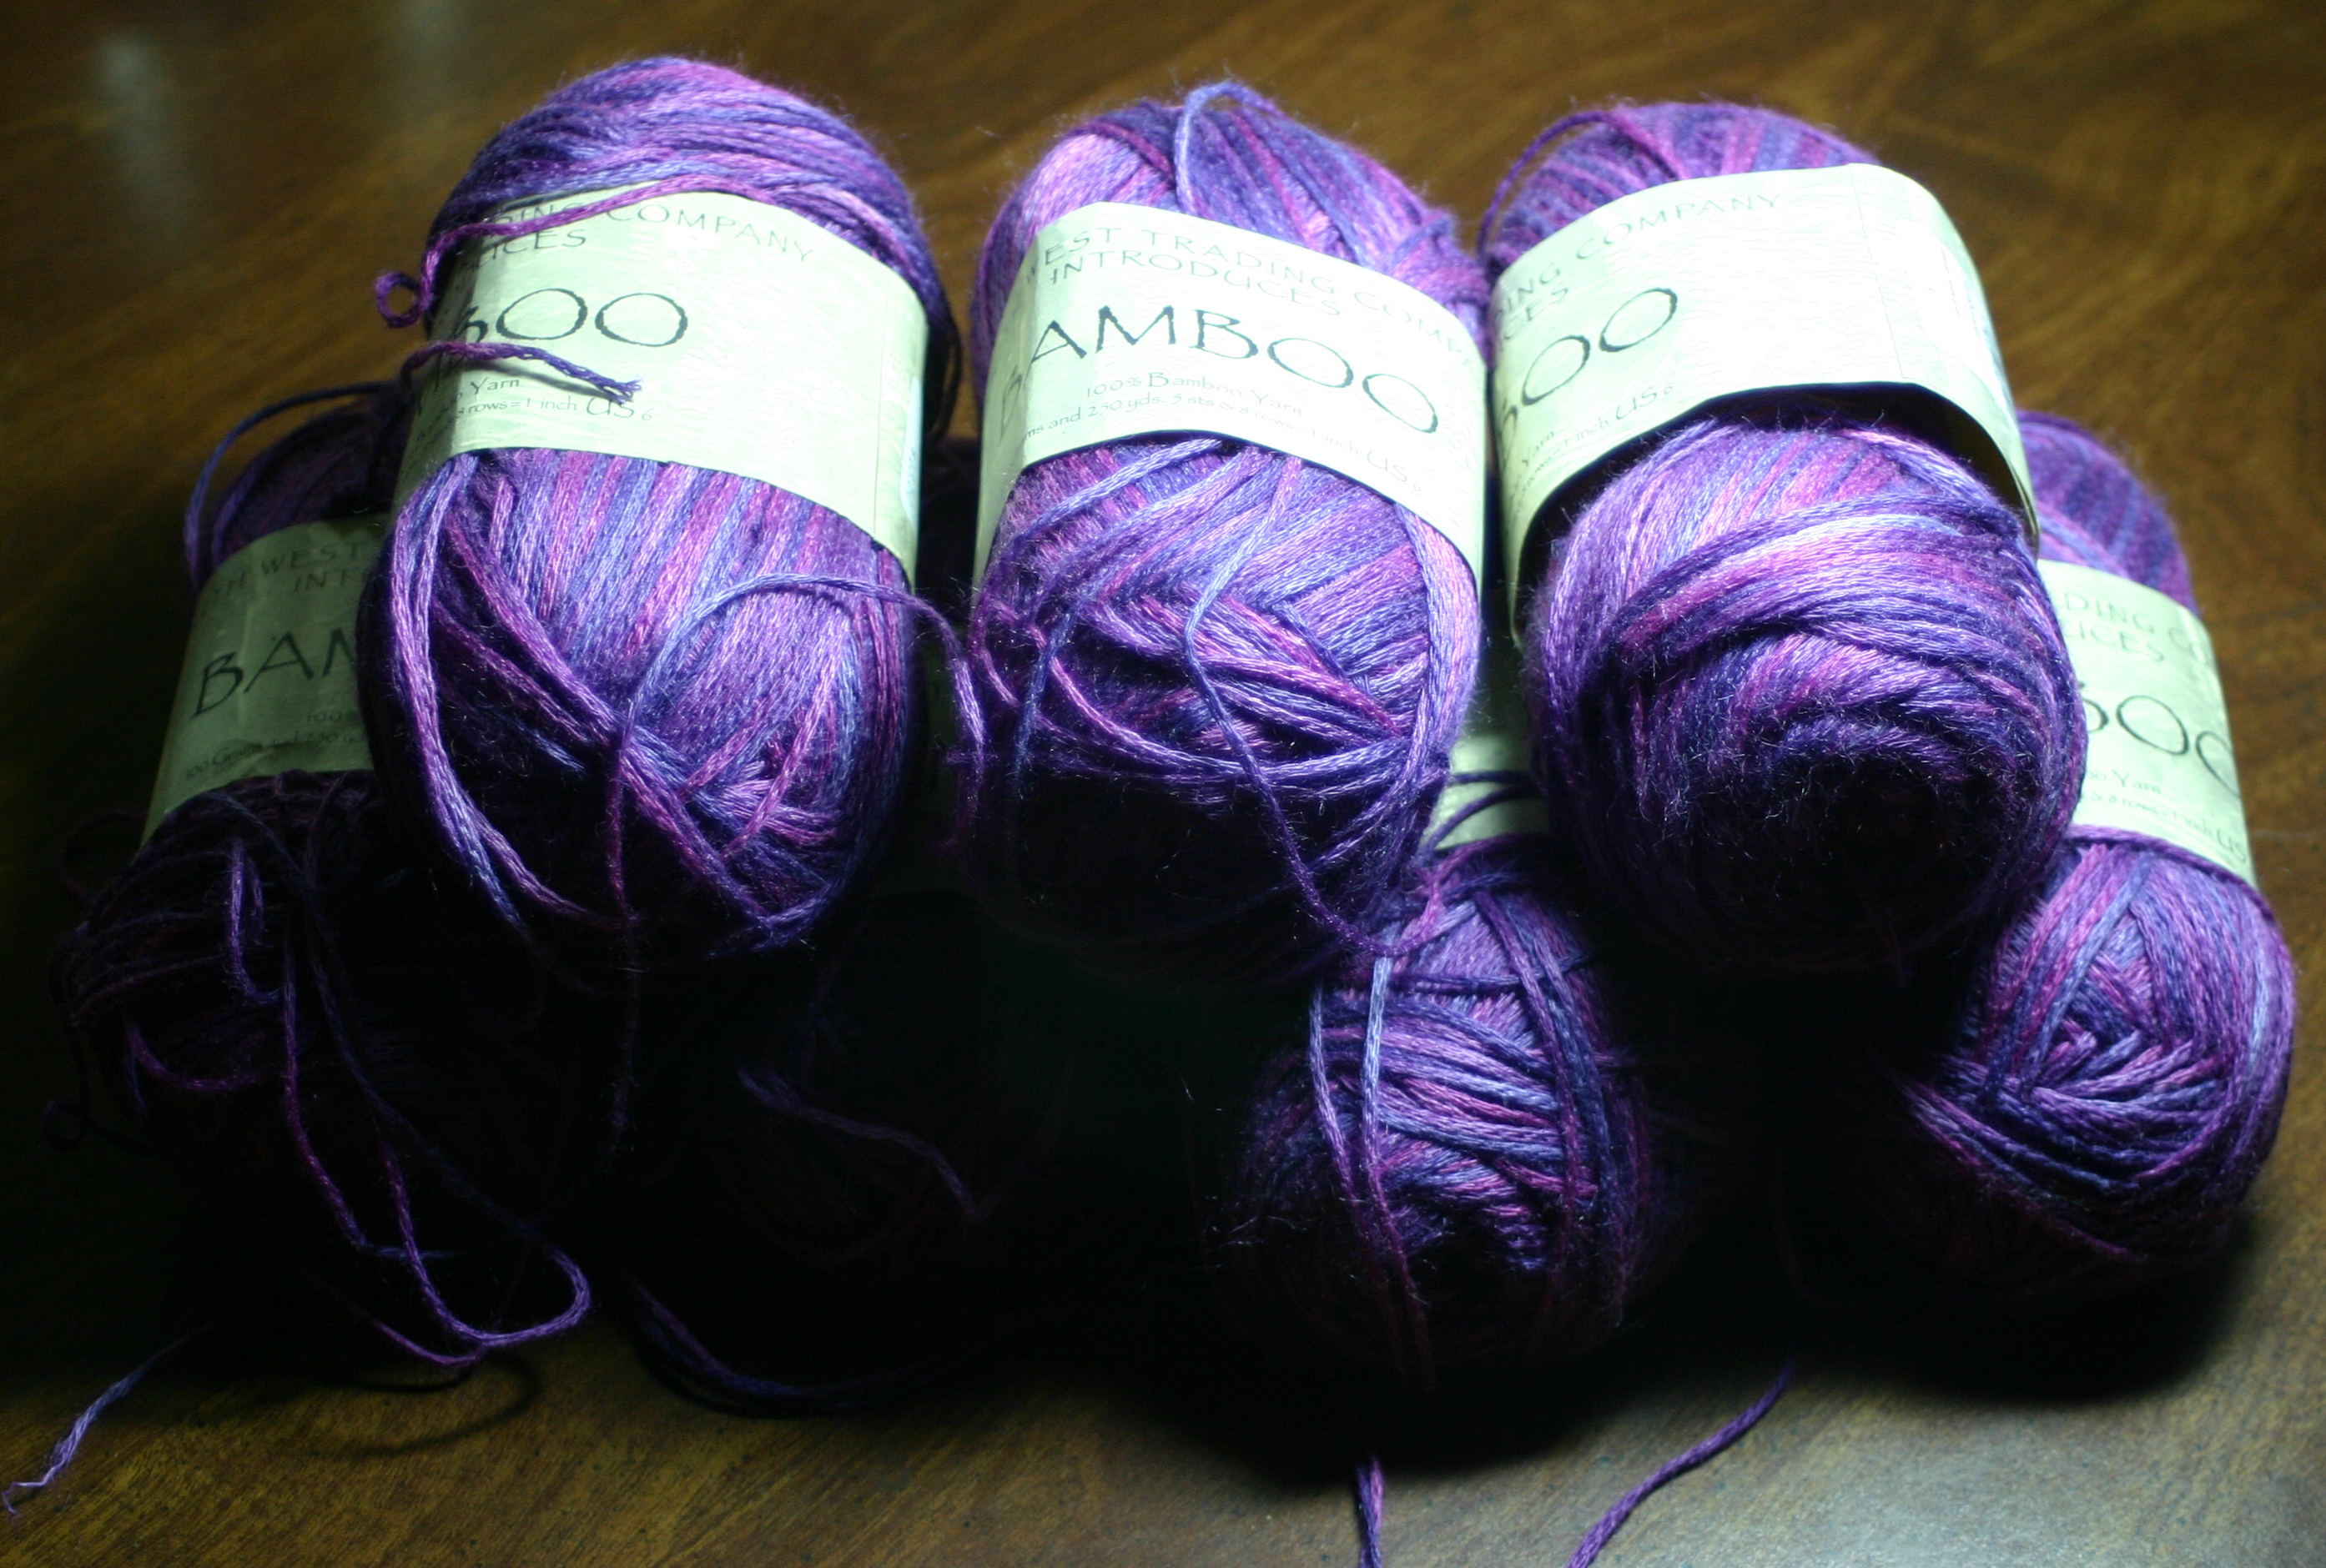 SWTC Bamboo purple (6 skeins plus one partly used skein) - 100% bamboo, 100g/250 yds, 20 sts=4